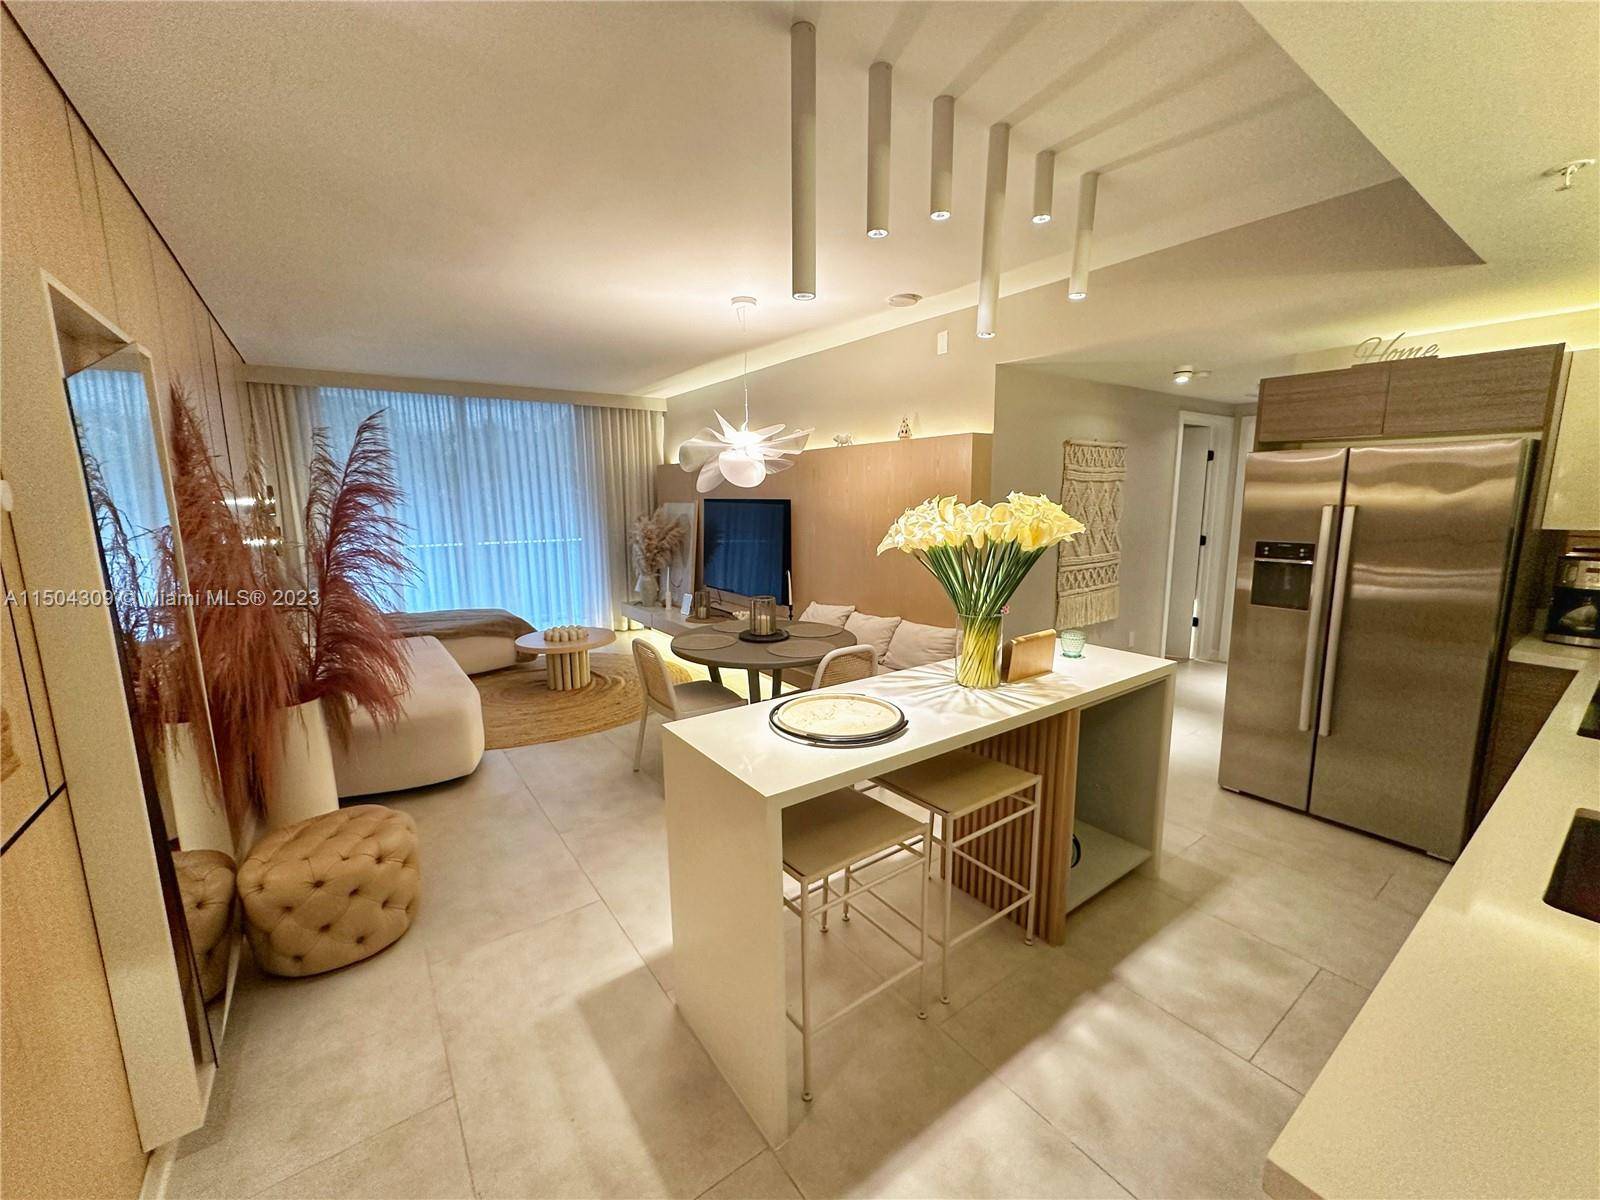 Fully furnished Turn Key 2 Bedroom 2 Bathroom condo right in the heart of Brickell available for 1 year lease.